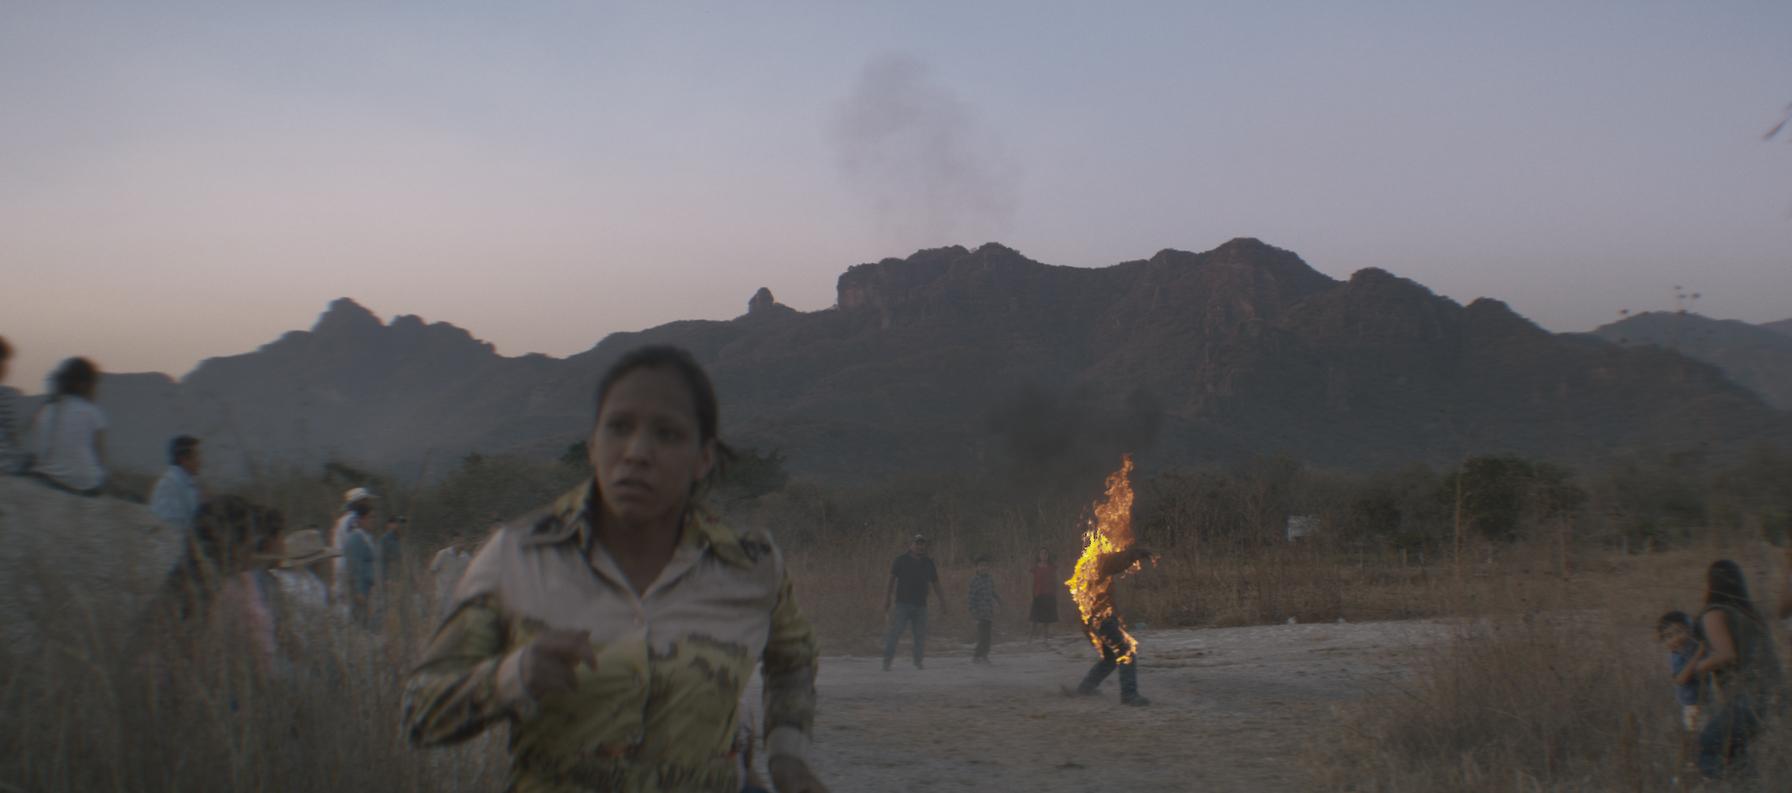 A woman runs away from a scene where several other people are looking at a person on fire.